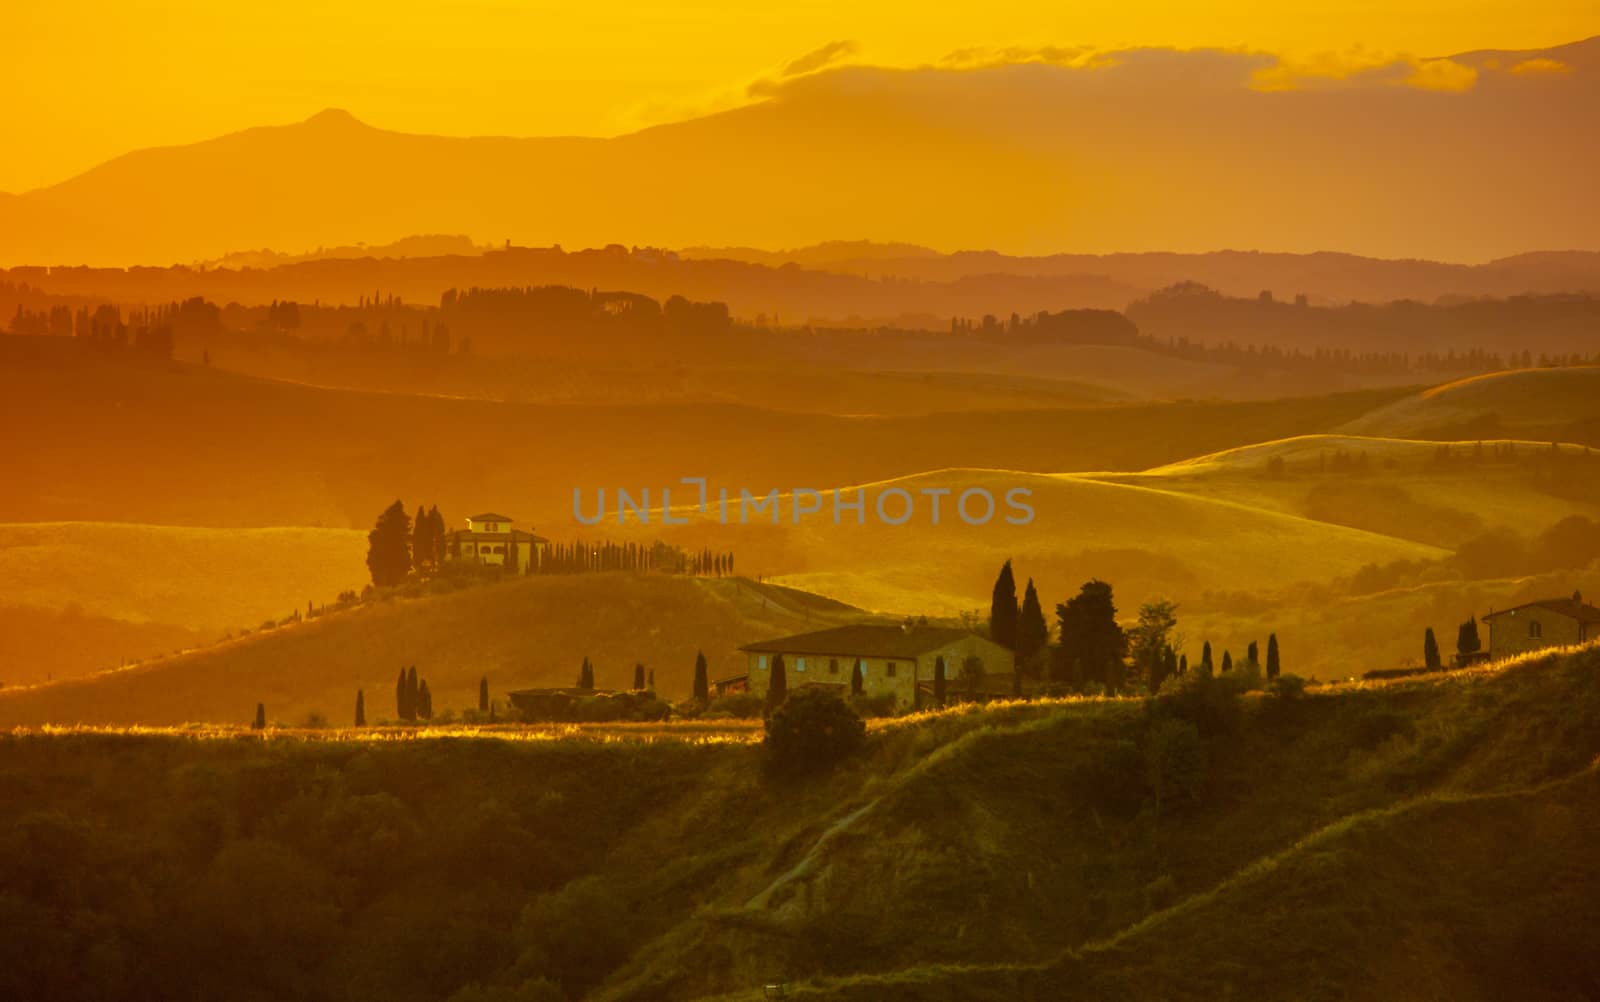 Evening in Tuscany. Hilly Tuscan landscape in golden mood at sunset time with silhouettes of cypresses and farm houses, Italy by pyty